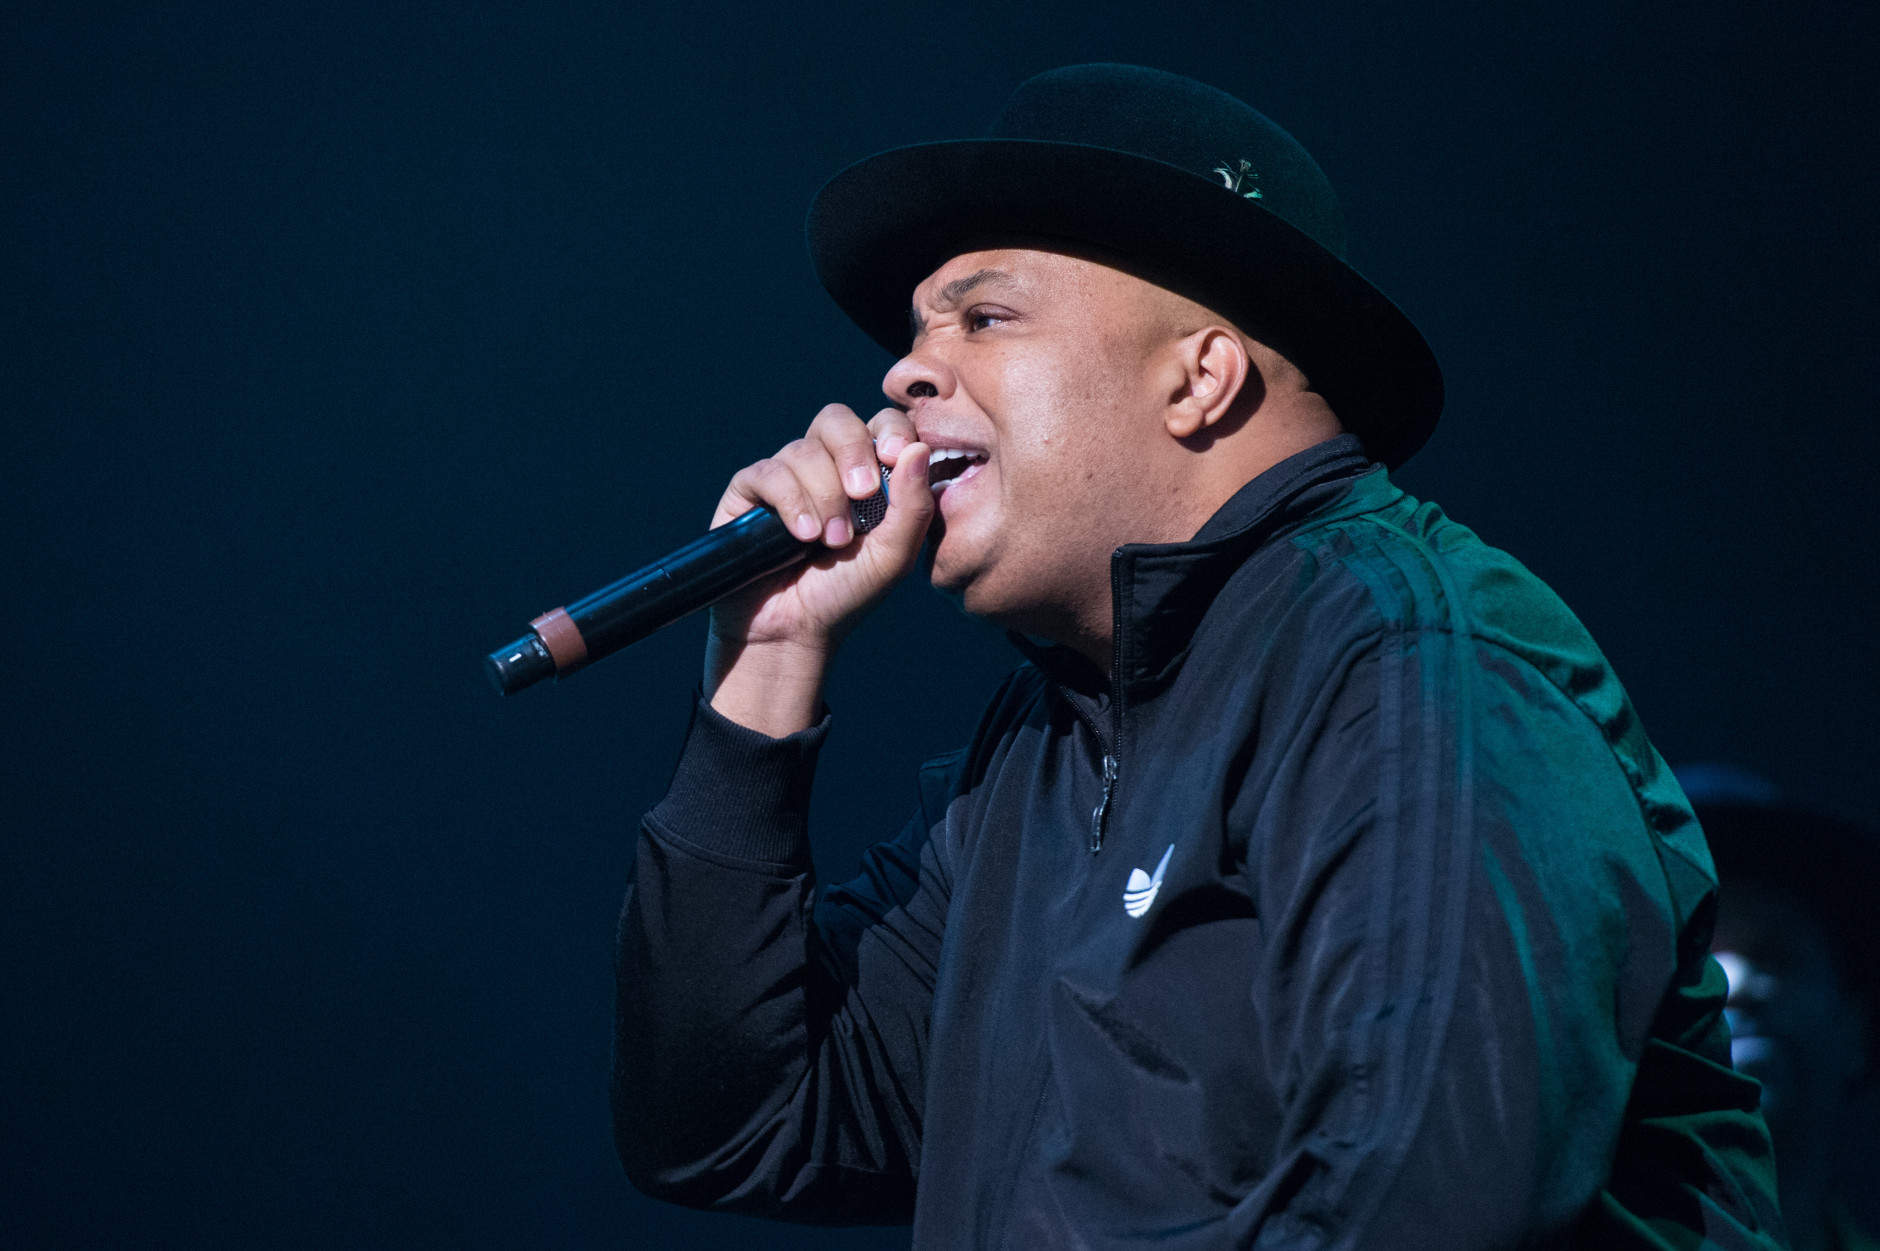 Joseph Simmons, also known as Rev Run, performs at Christmas in Brooklyn at the Barclays Center on Friday, Dec. 19, 2014, in Brooklyn, New York. (Photo by Scott Roth/Invision/AP)